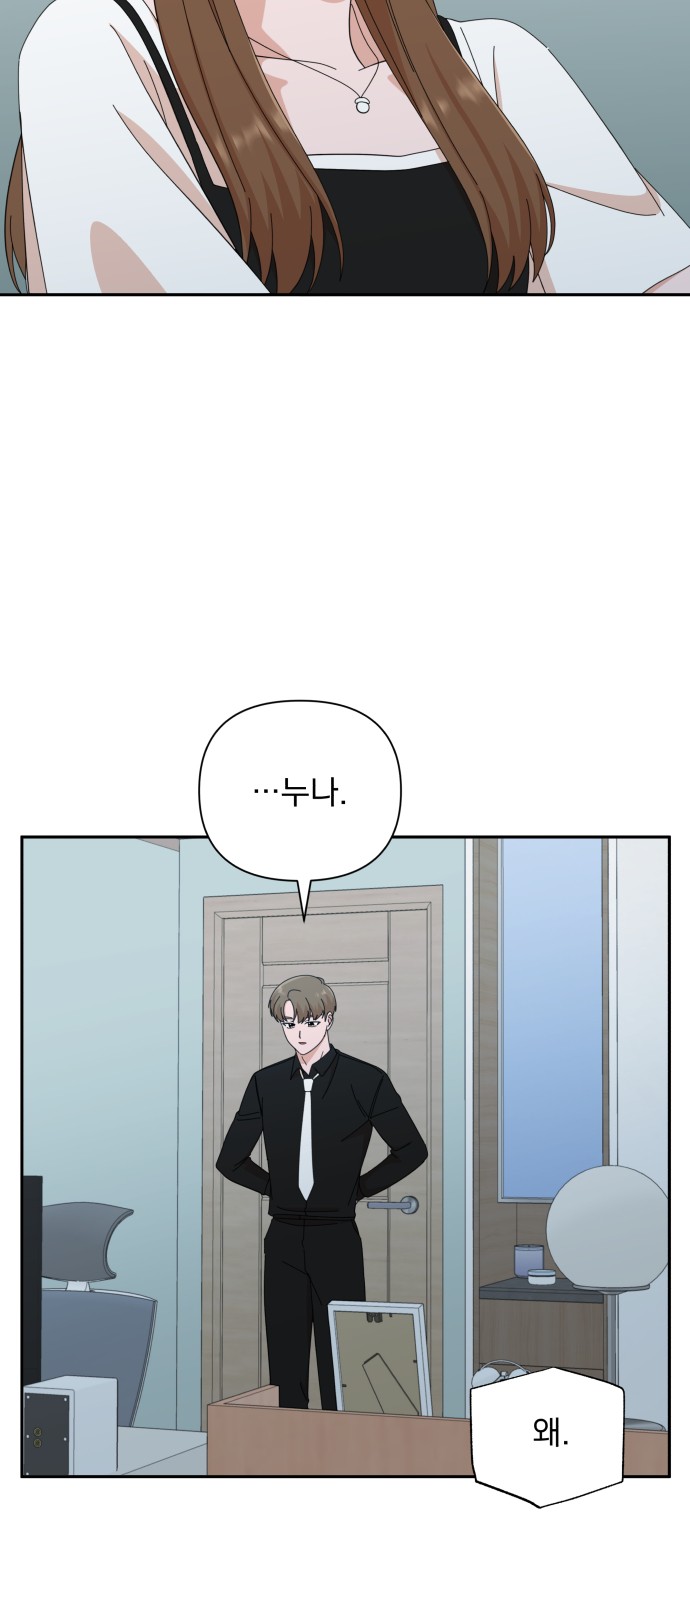 The Man With Pretty Lips - Chapter 38 - Page 2